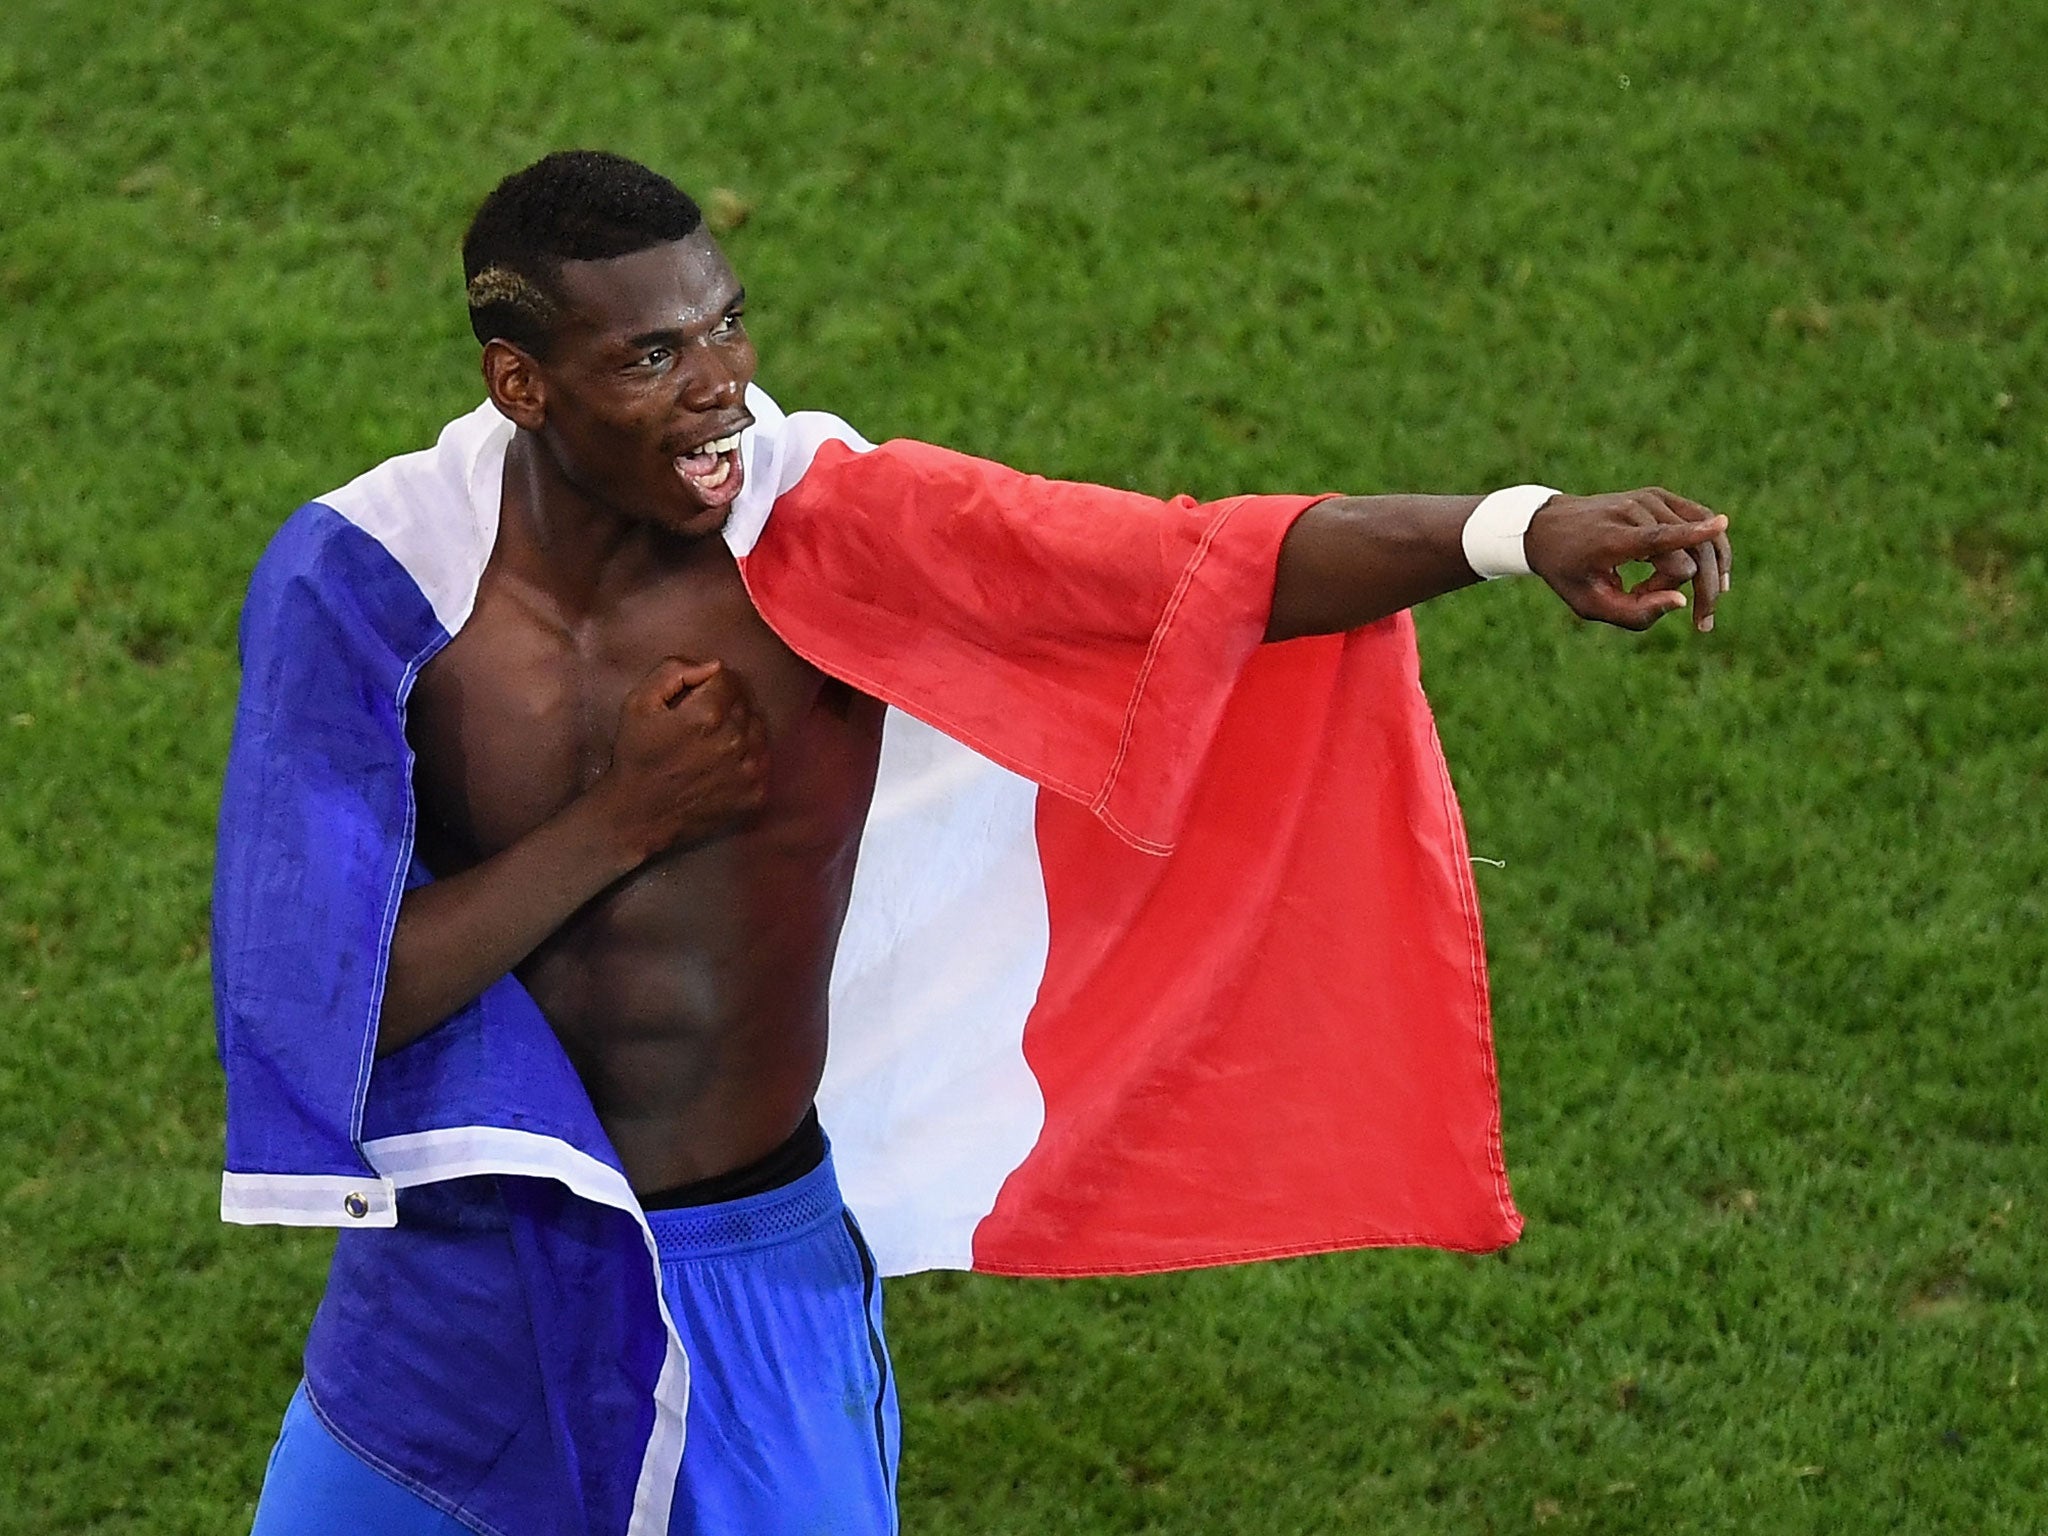 Paul Pogba showed his qualities against Germany